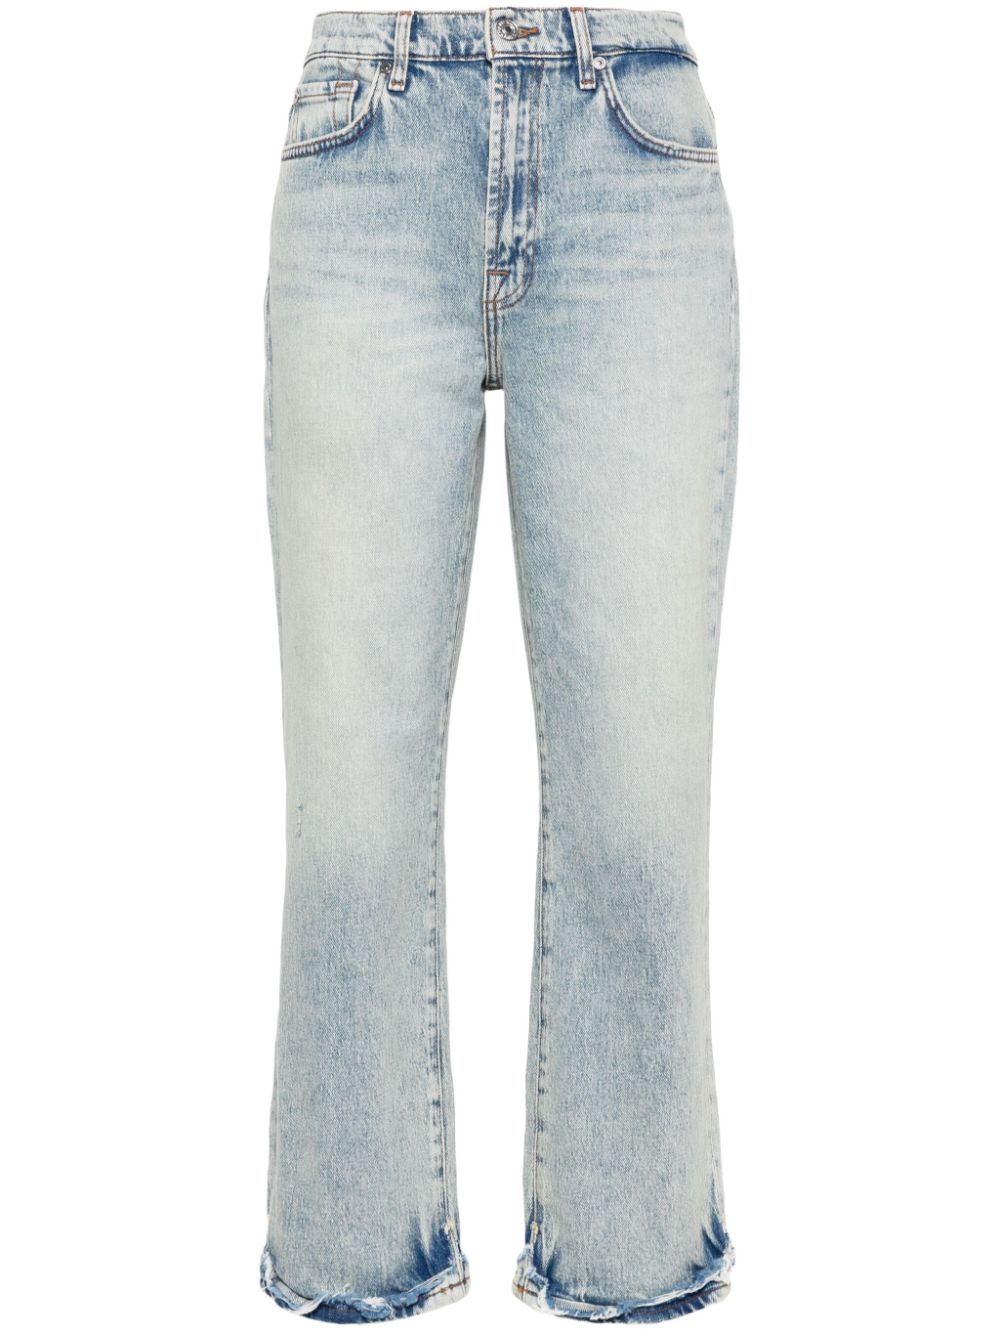 7 For All Mankind 7 FOR ALL MANKIND- Logan Cropped Denim Jeans